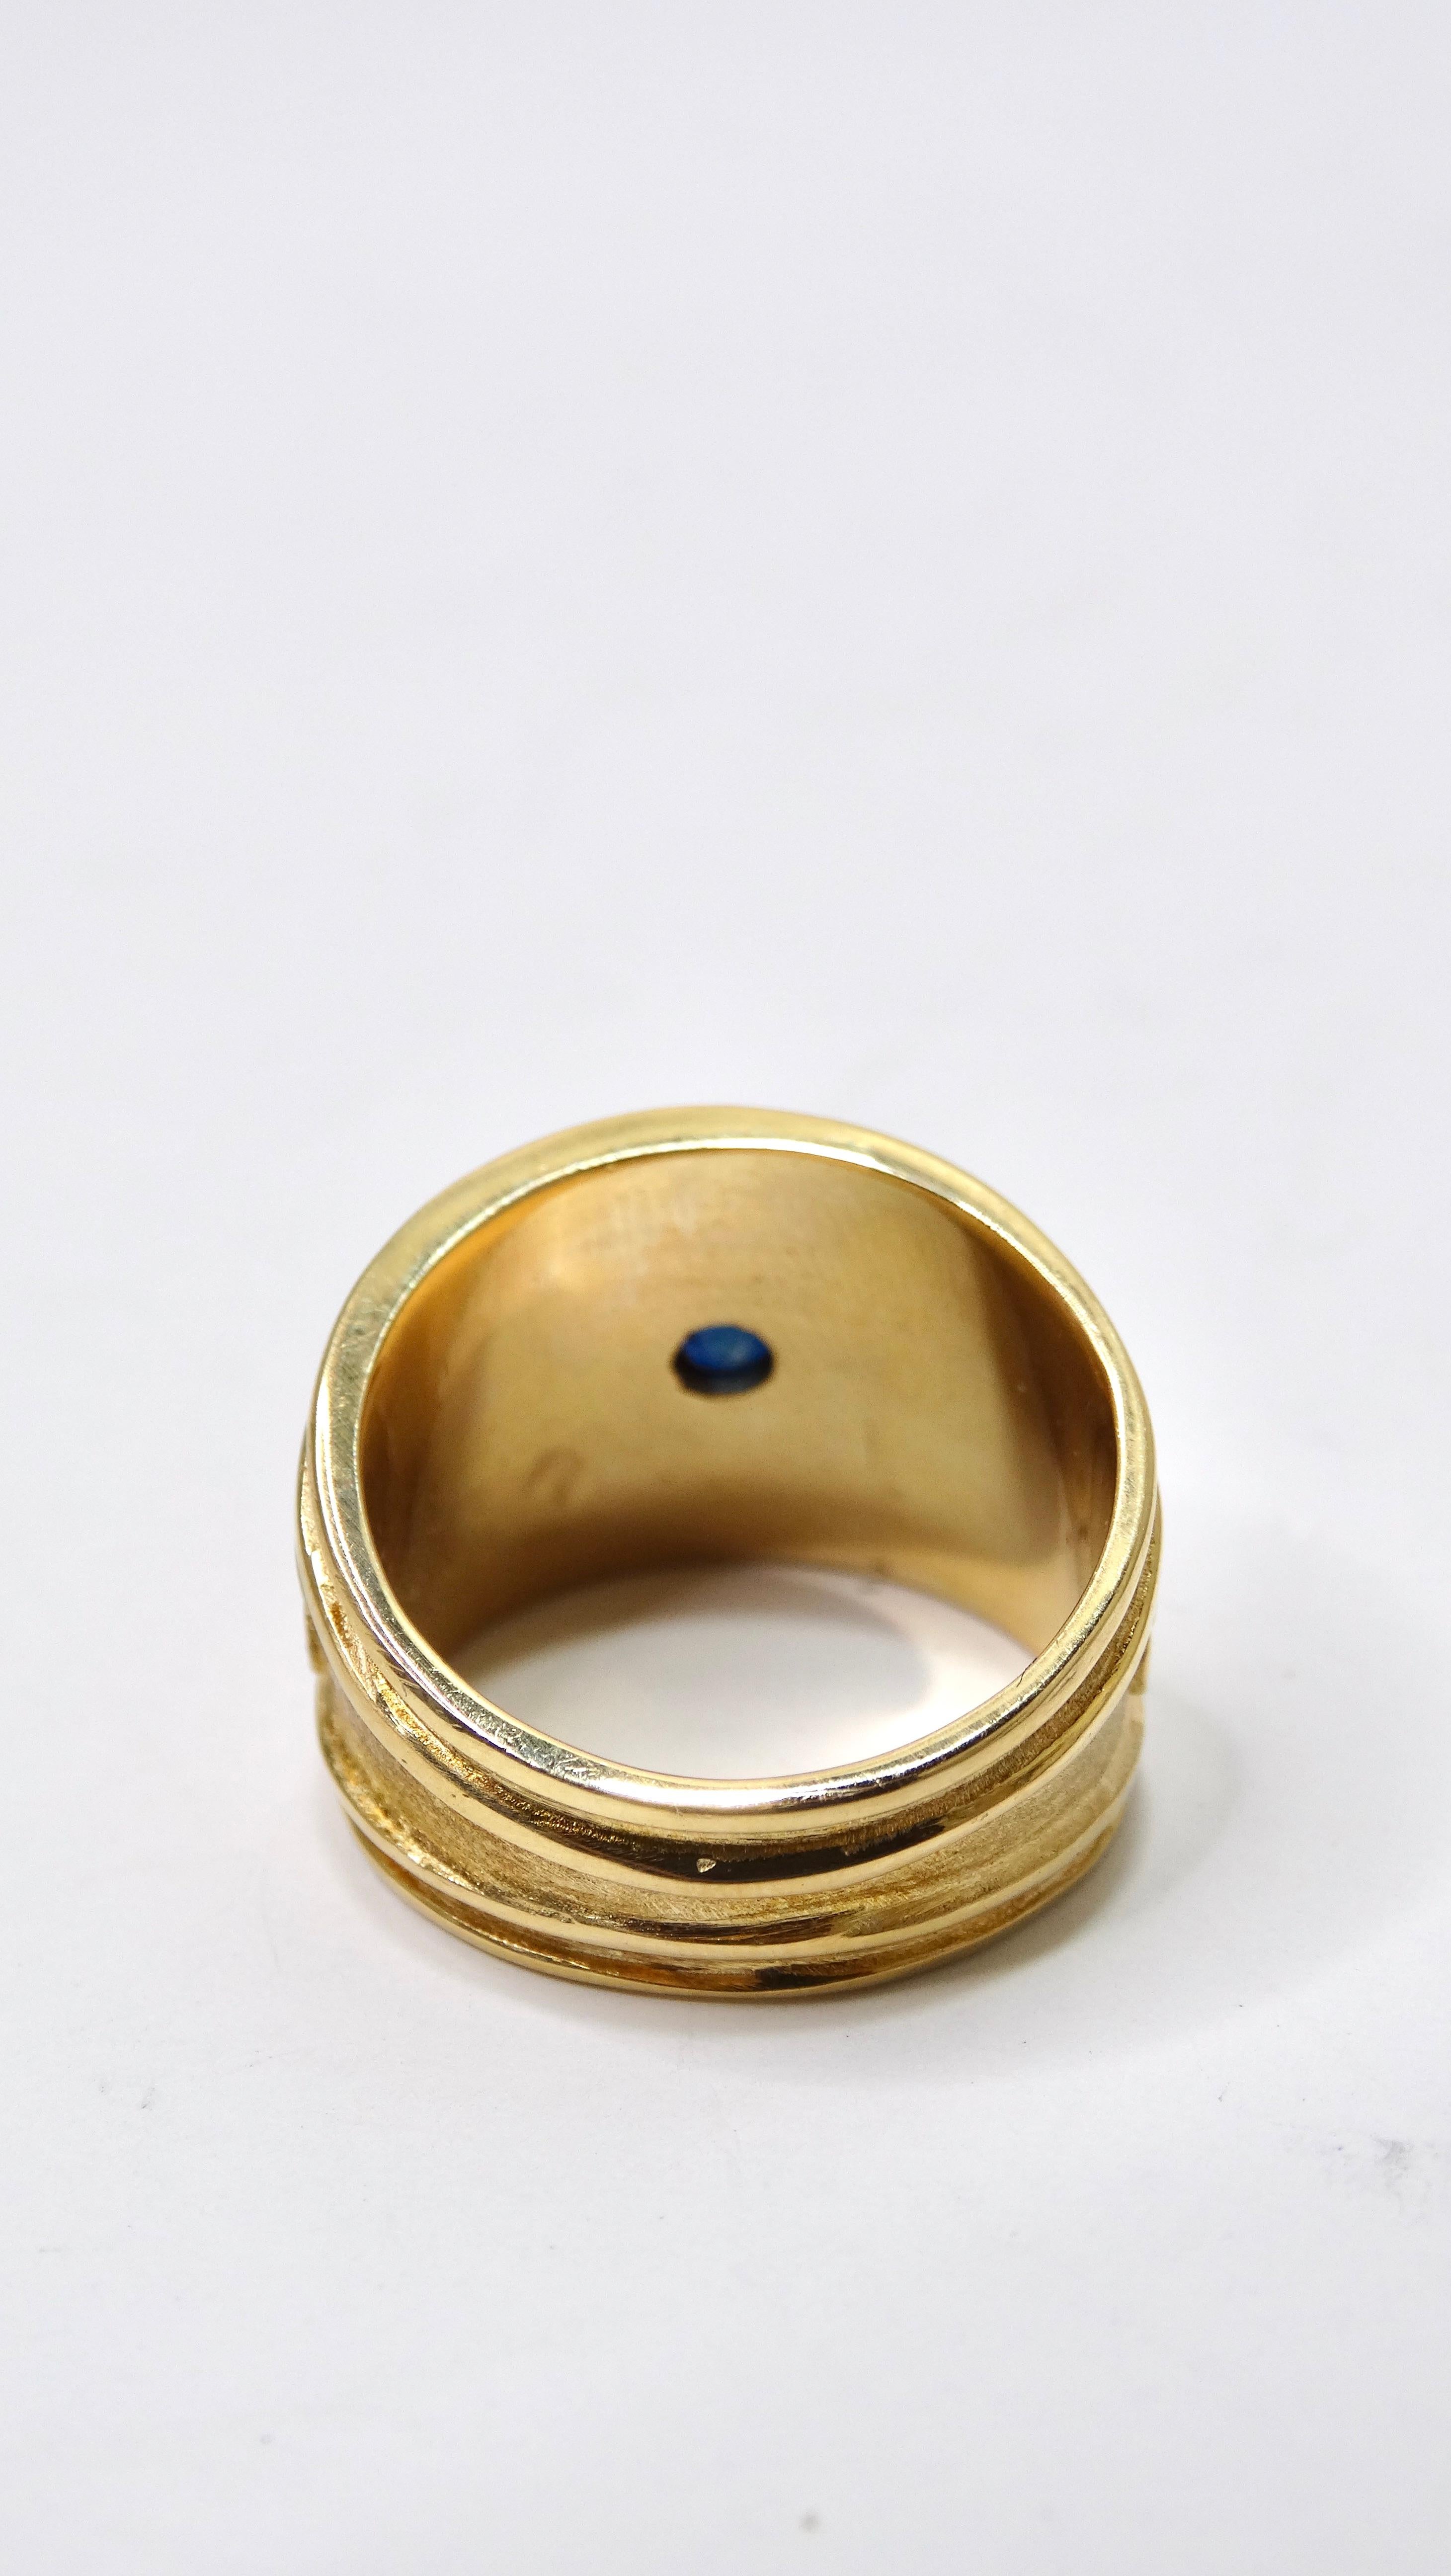 Sapphire Victorian 18k Gold Ring In Excellent Condition For Sale In Scottsdale, AZ